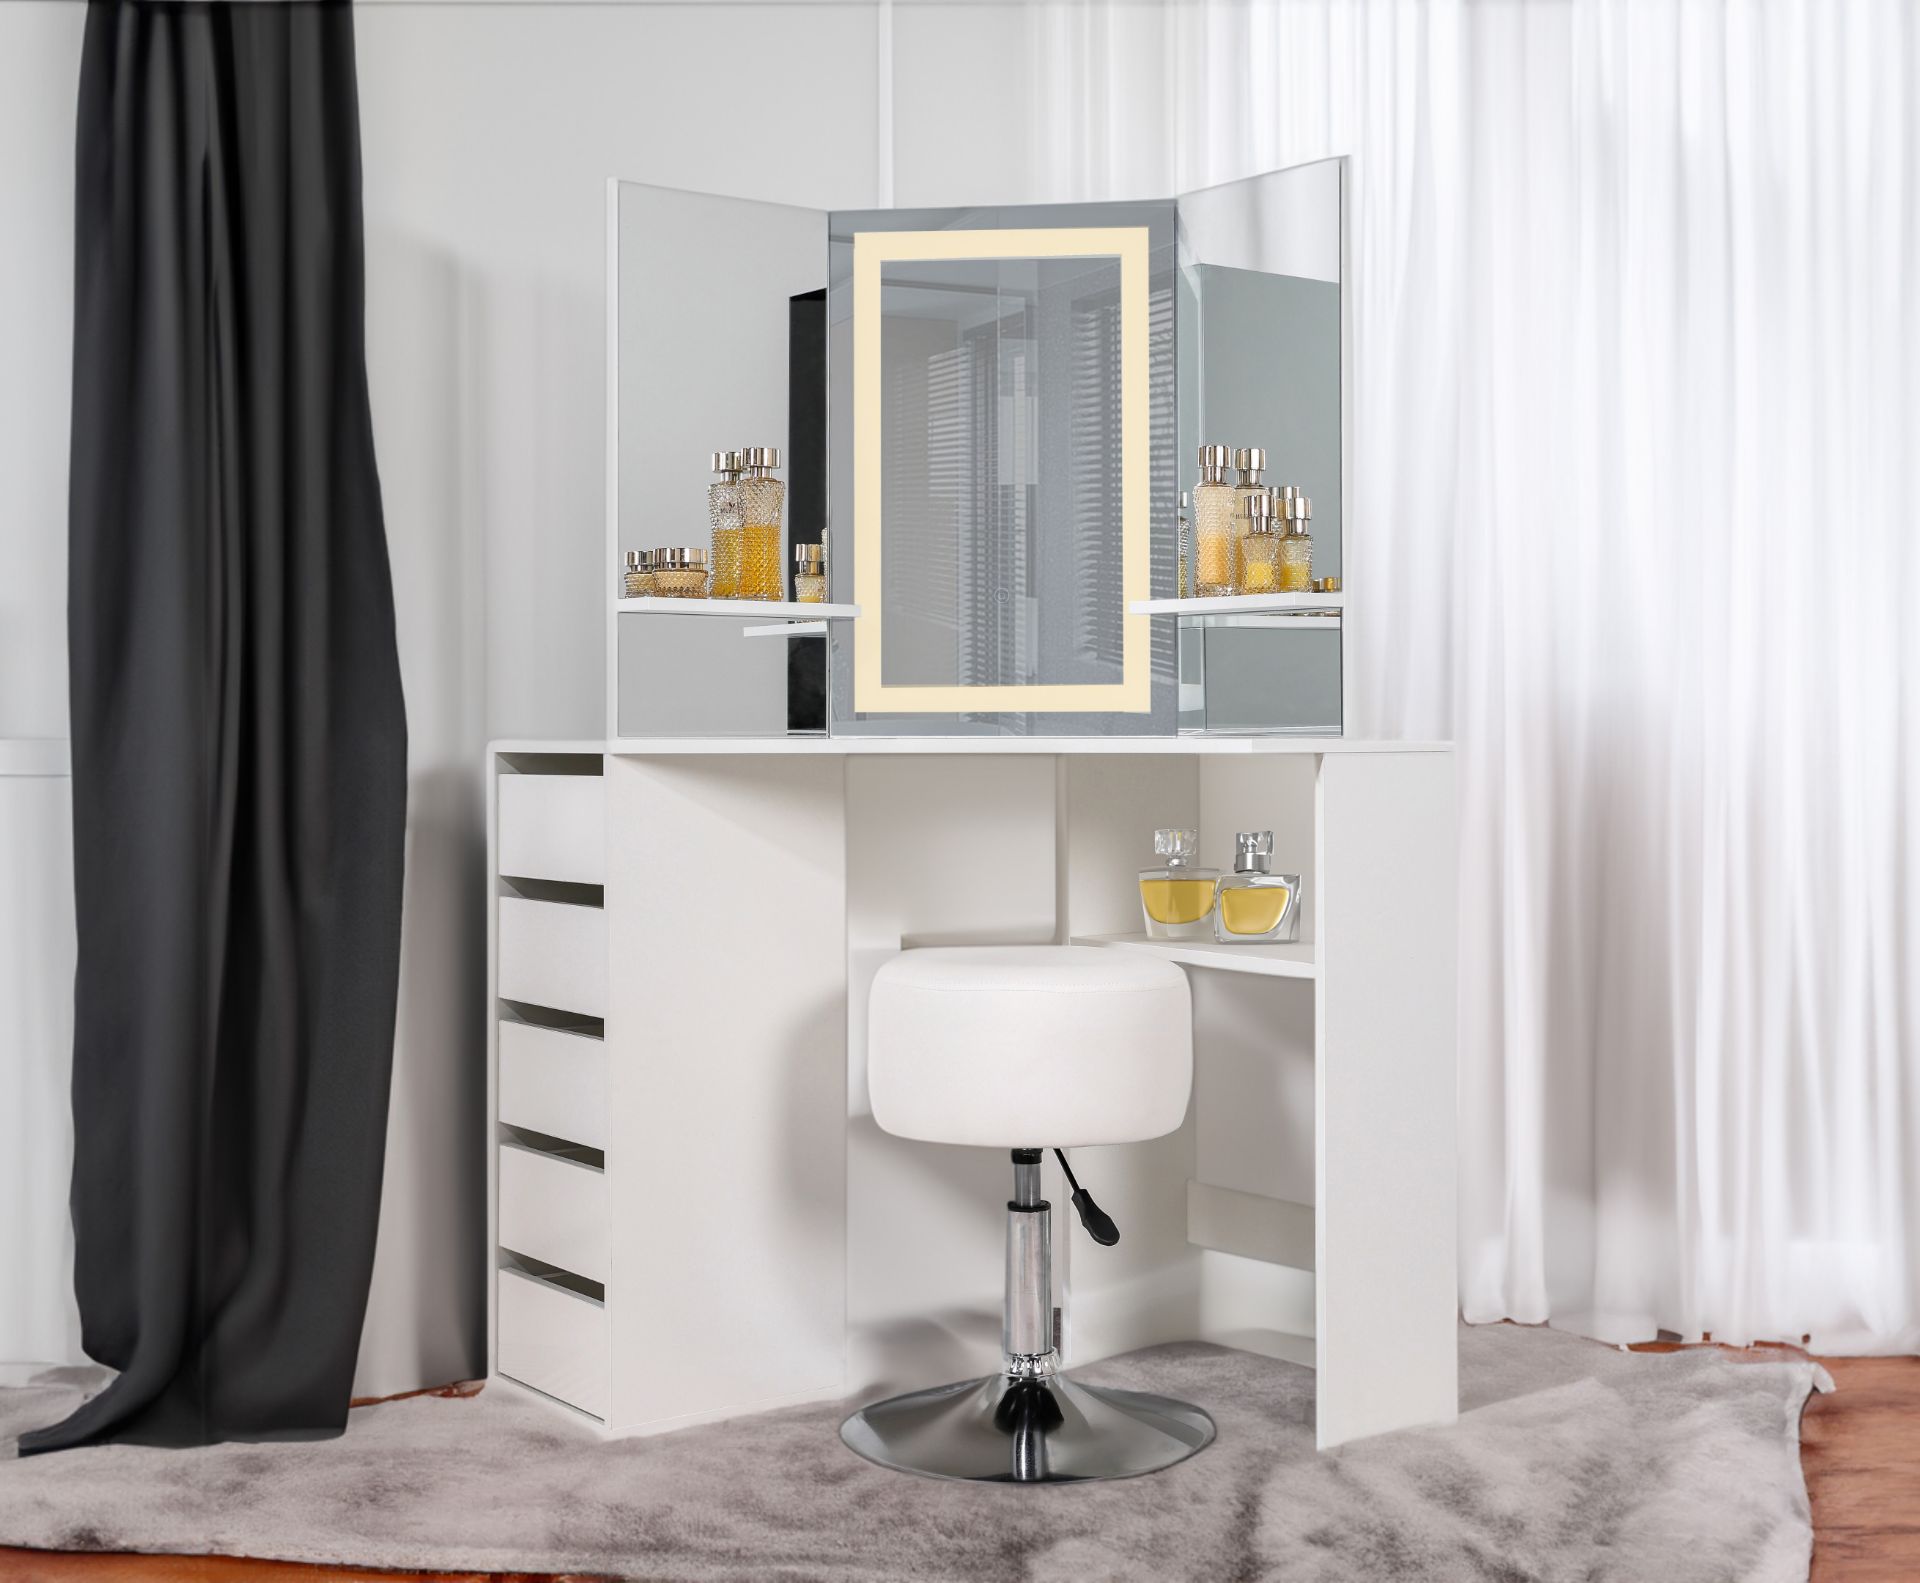 5 X BRAND NEW MAKE UP CORNER DRESSING TABLE 5 DRAWER WITH TOUCH LED MIRROR & STOOL RRP £1750